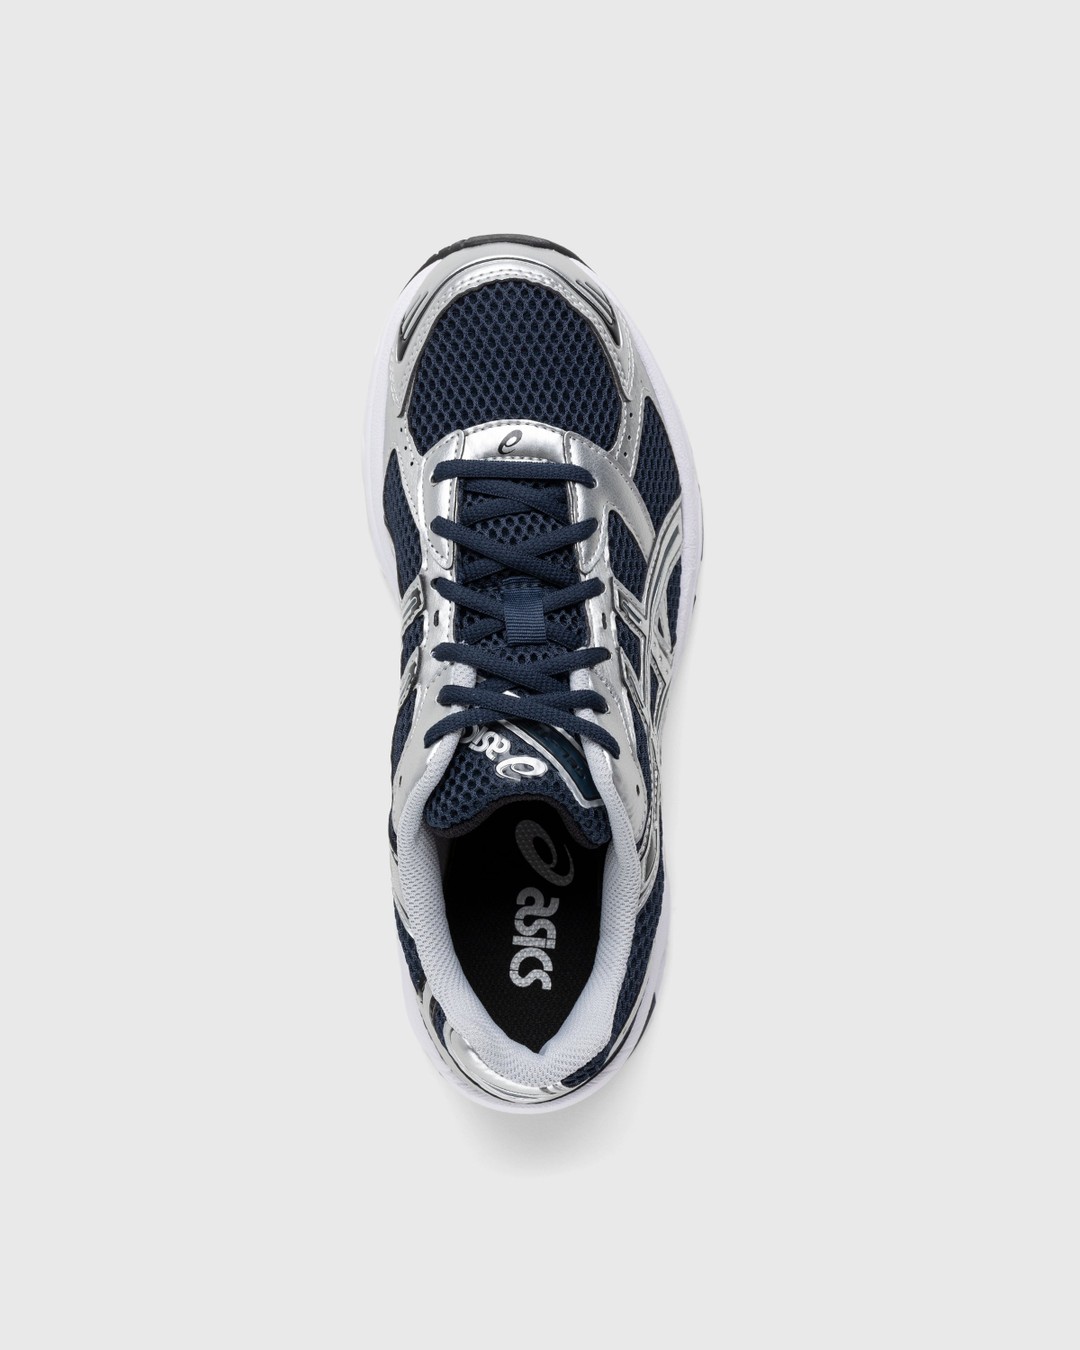 asics – GEL-1130 French Blue/Pure Silver - Low Top Sneakers - Blue - Image 5